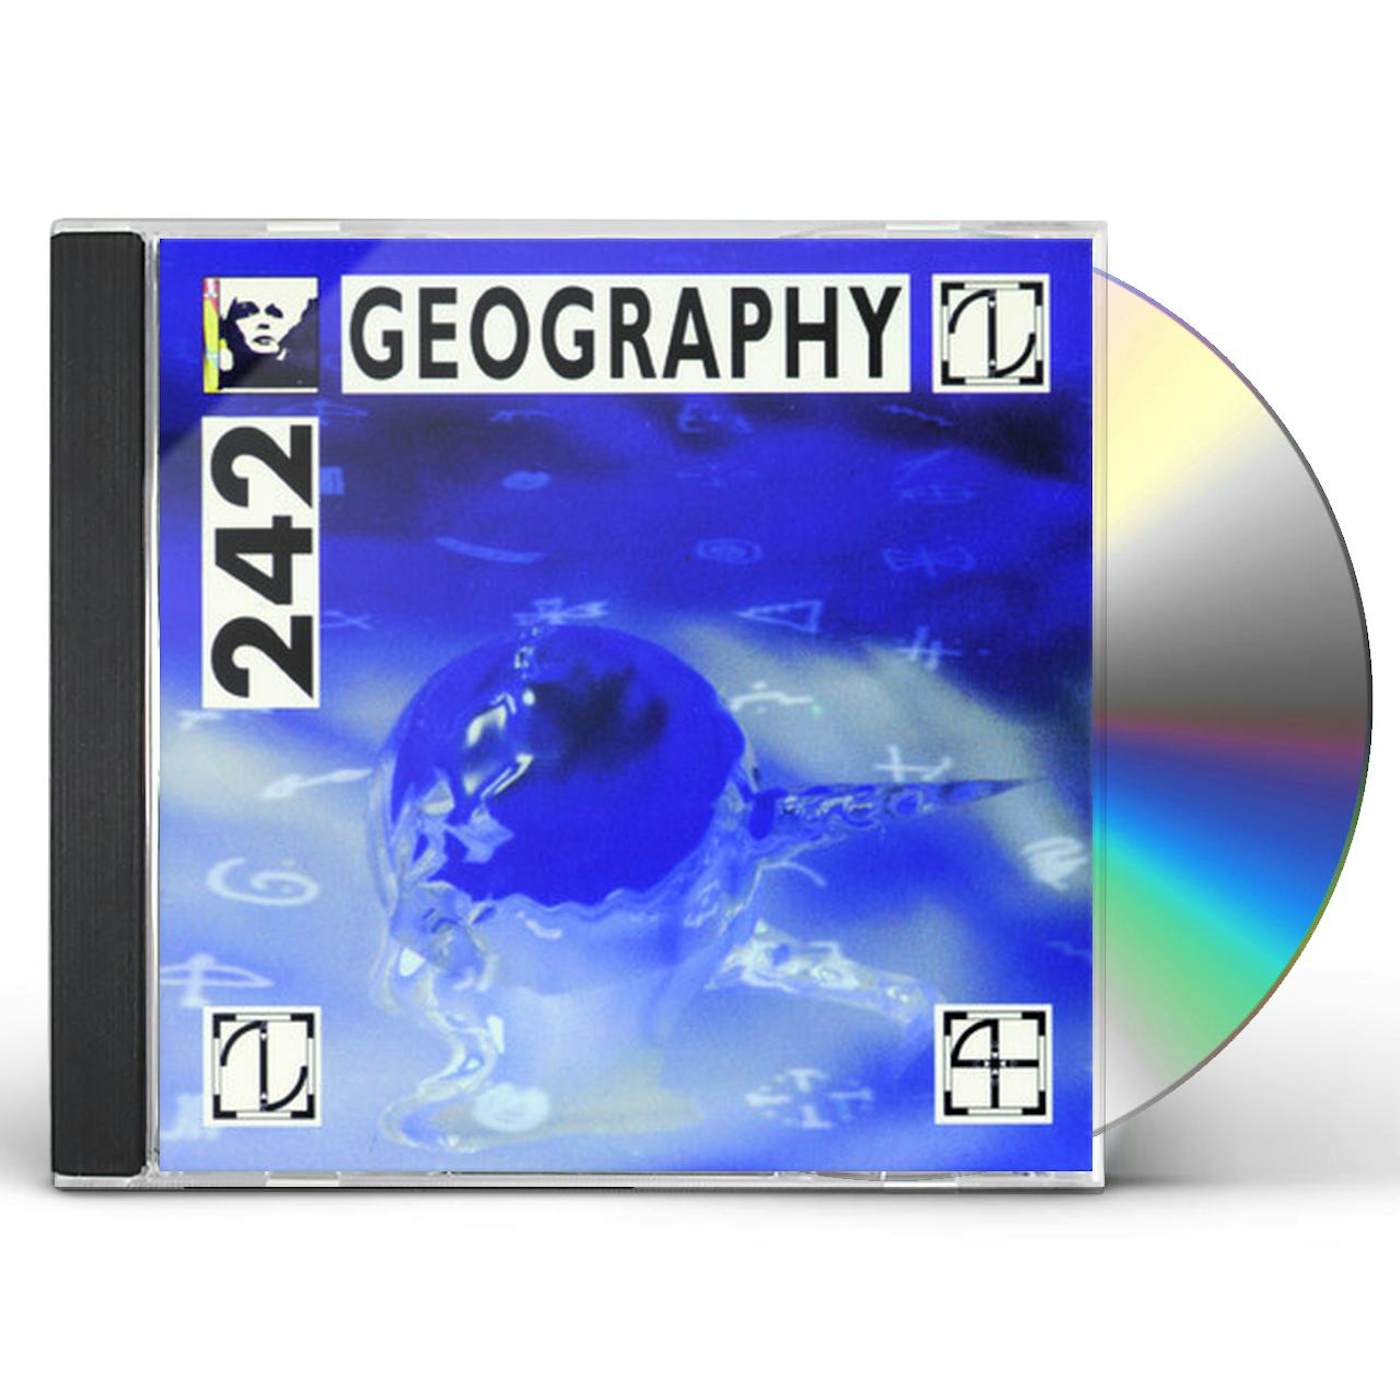 Front 242 GEOGRAPHY CD